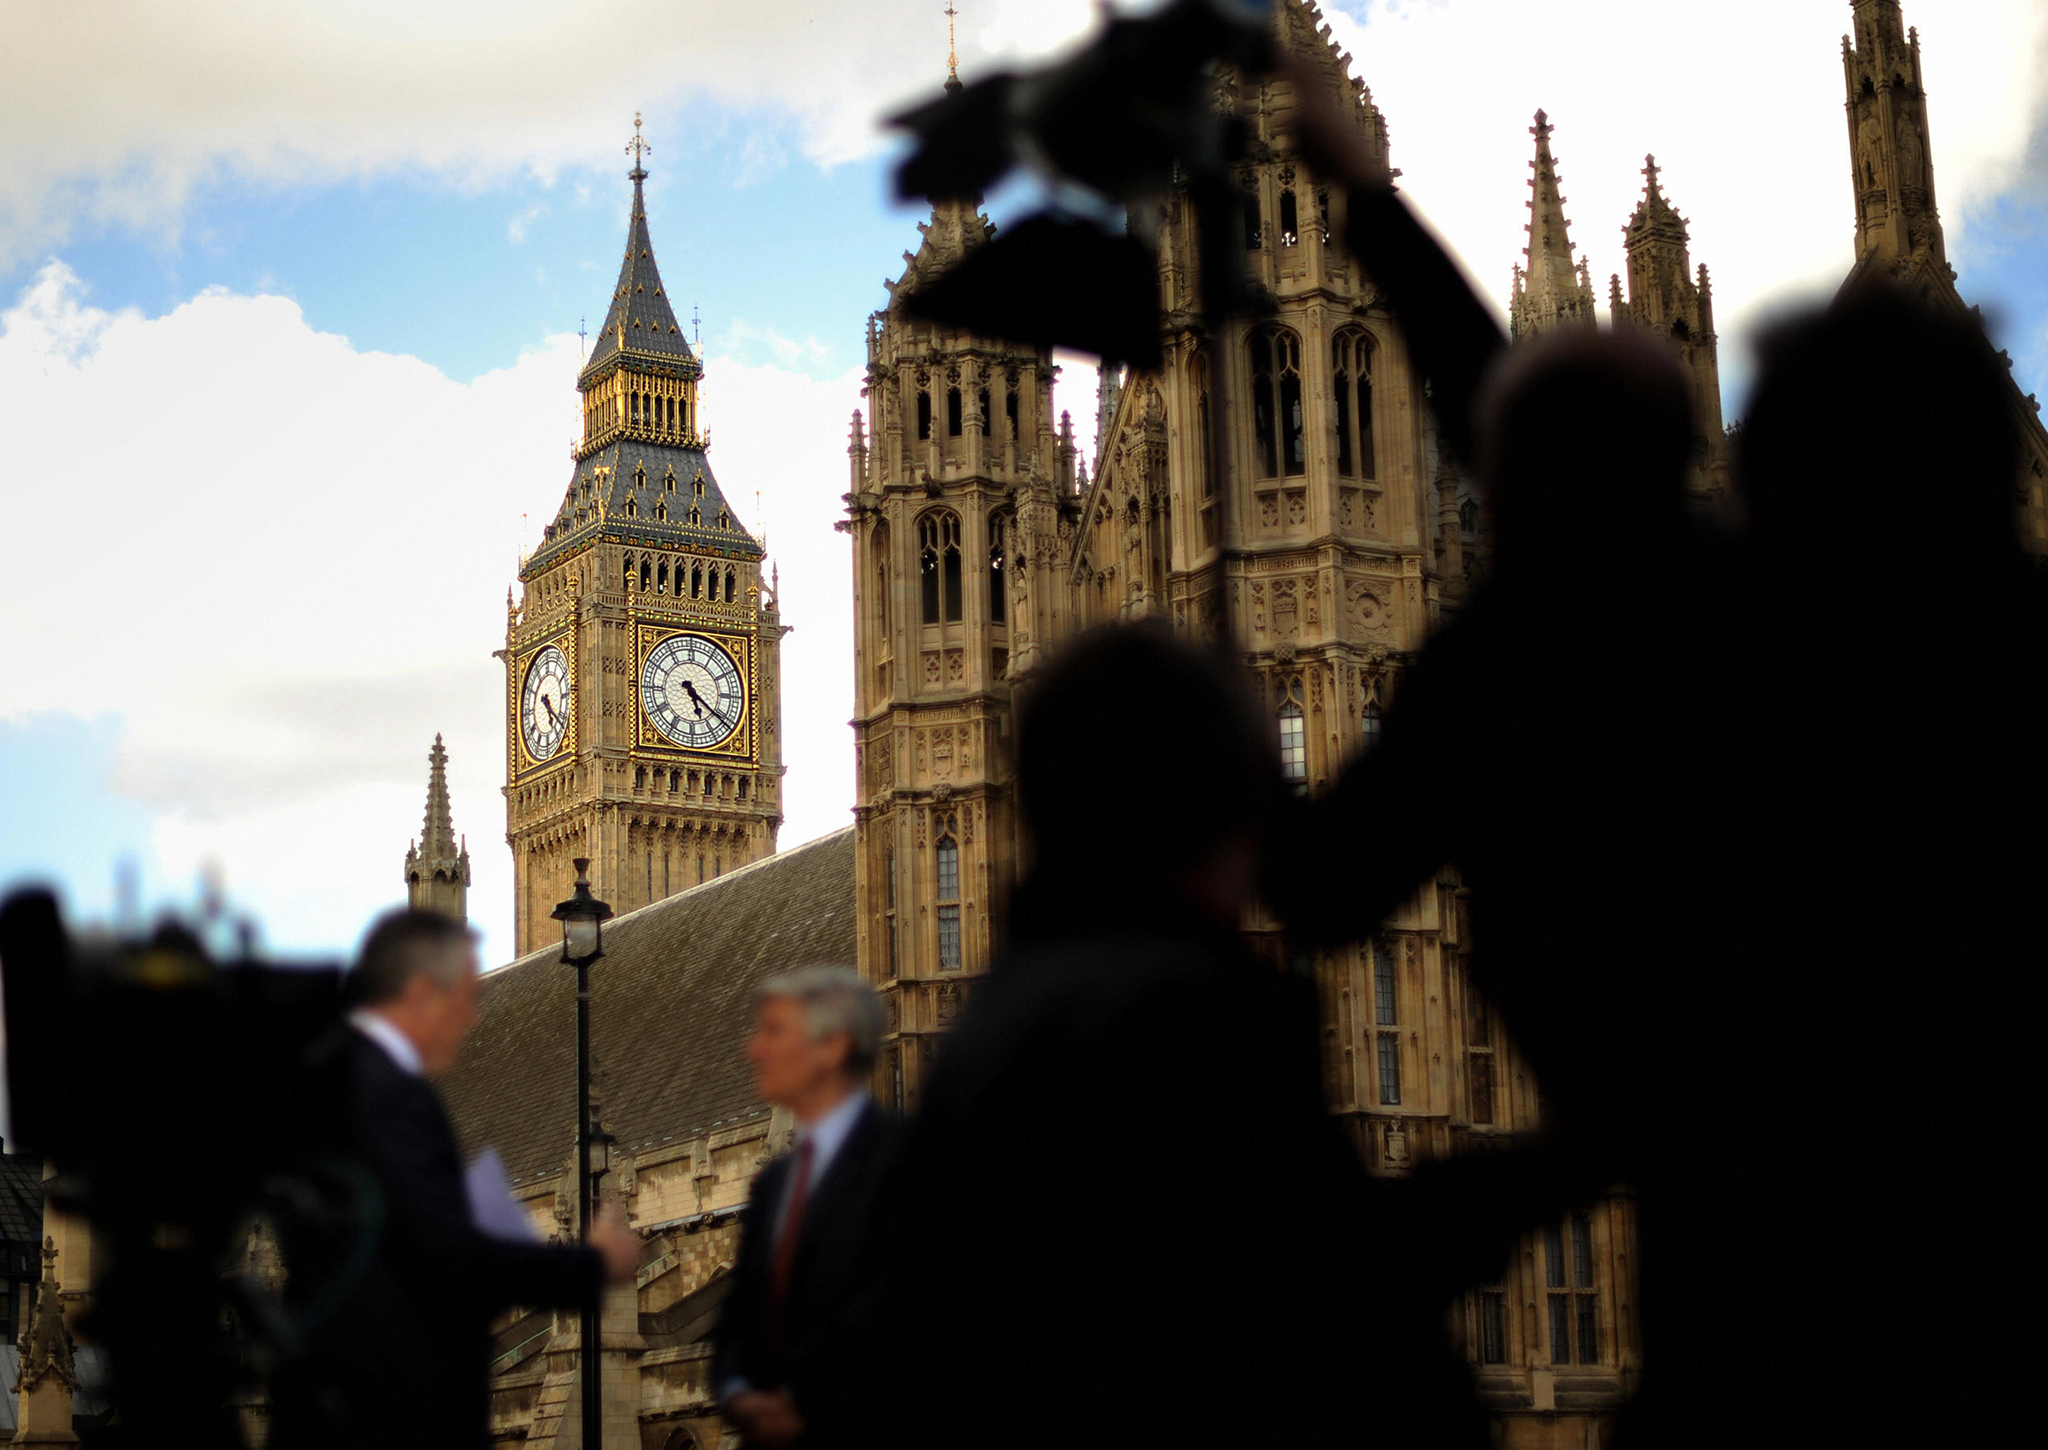 Television media gather outside Parliament following a high profile resignation from the House of Commons